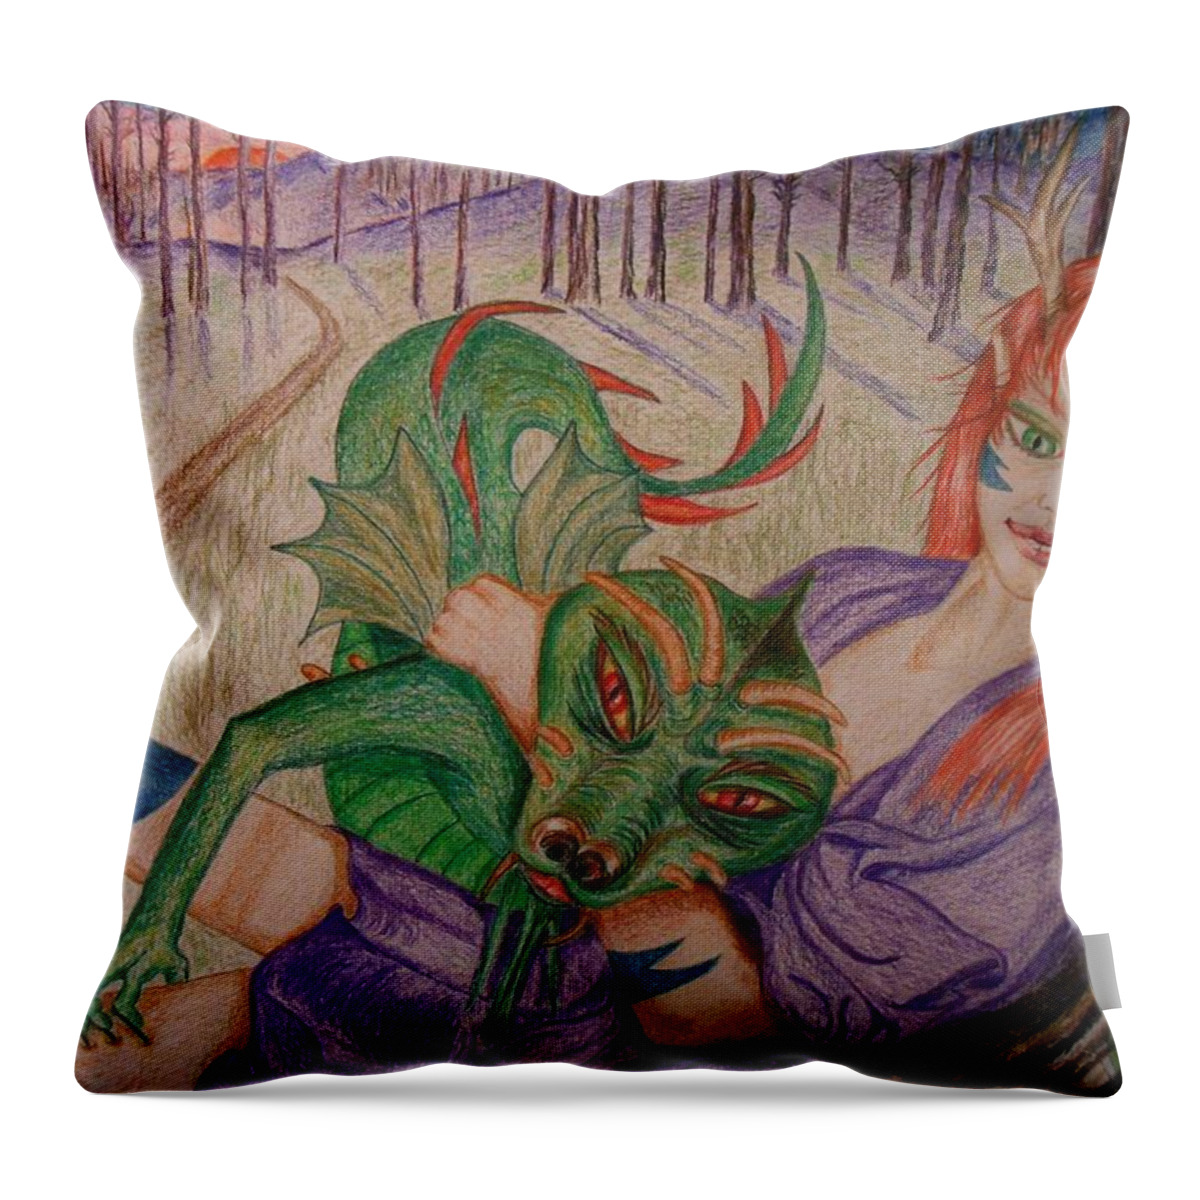 Dragon Throw Pillow featuring the drawing Her Dragon by Carrie Skinner